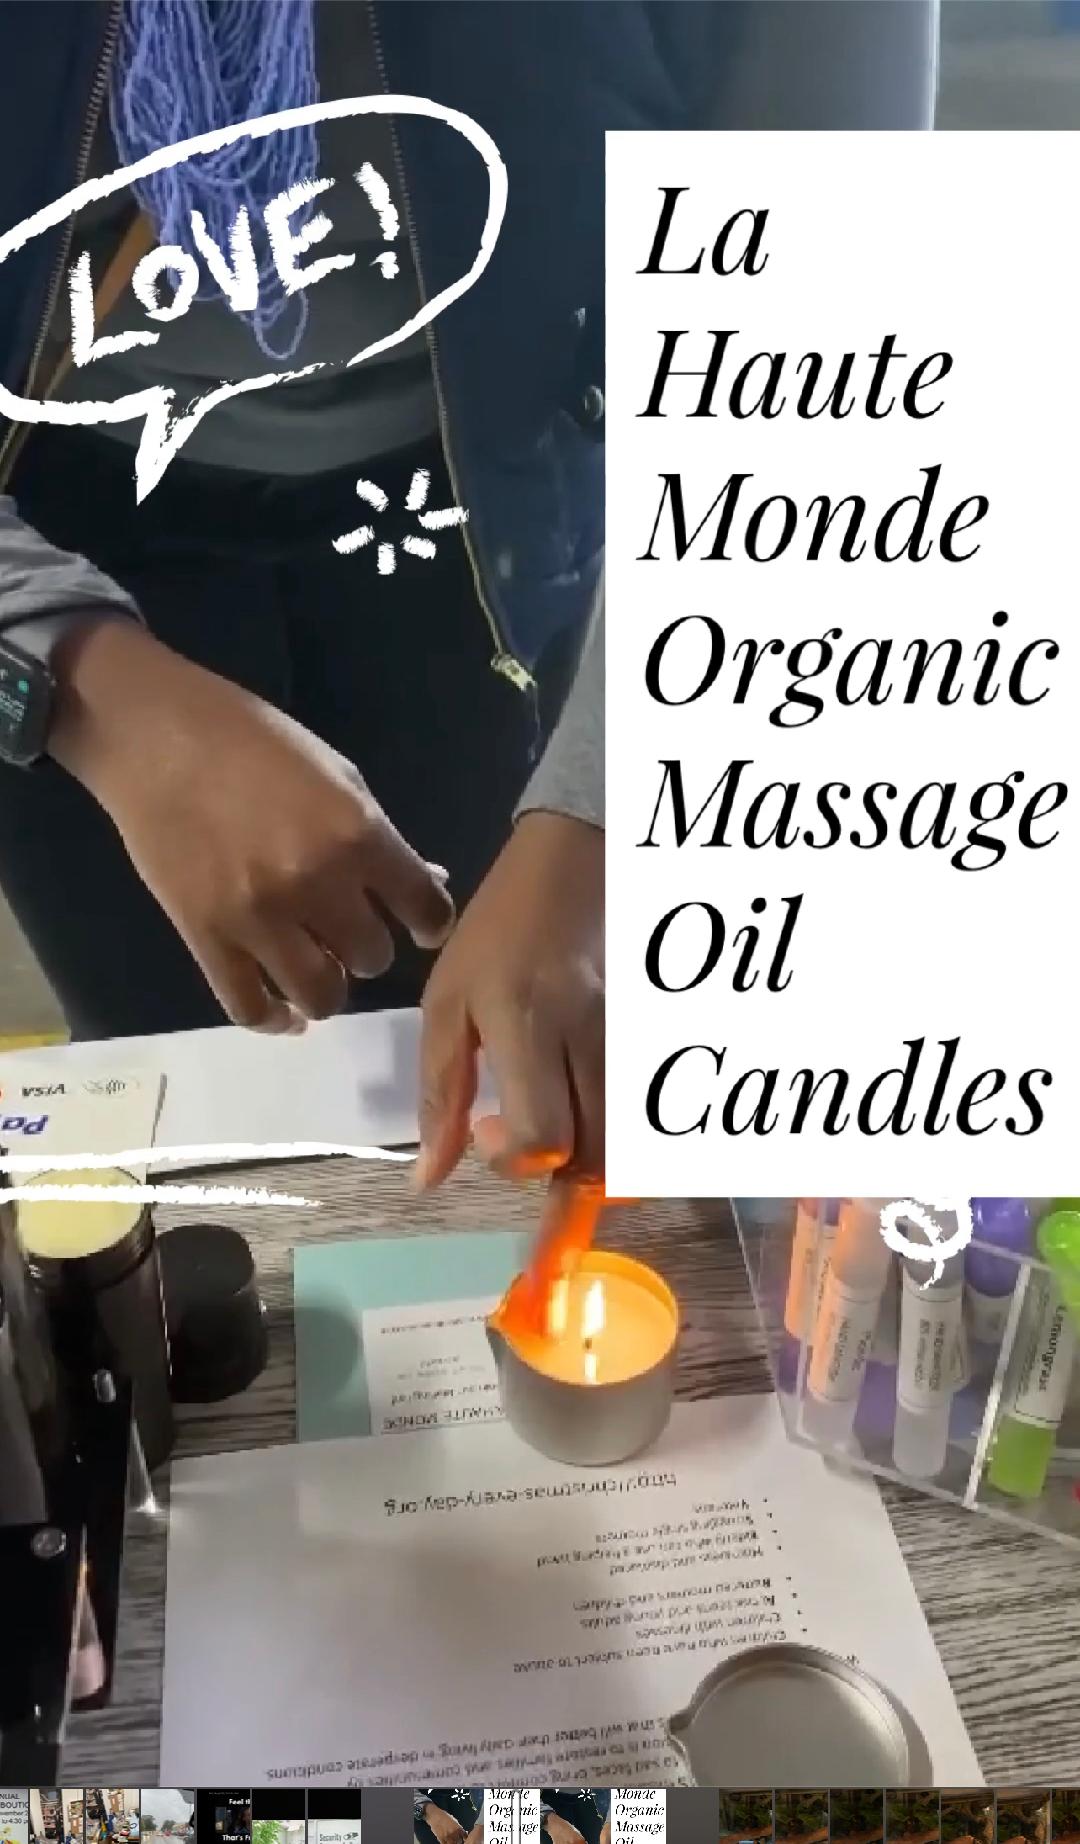 Organic Massage Oil Candles - Coming to the Website Soon!